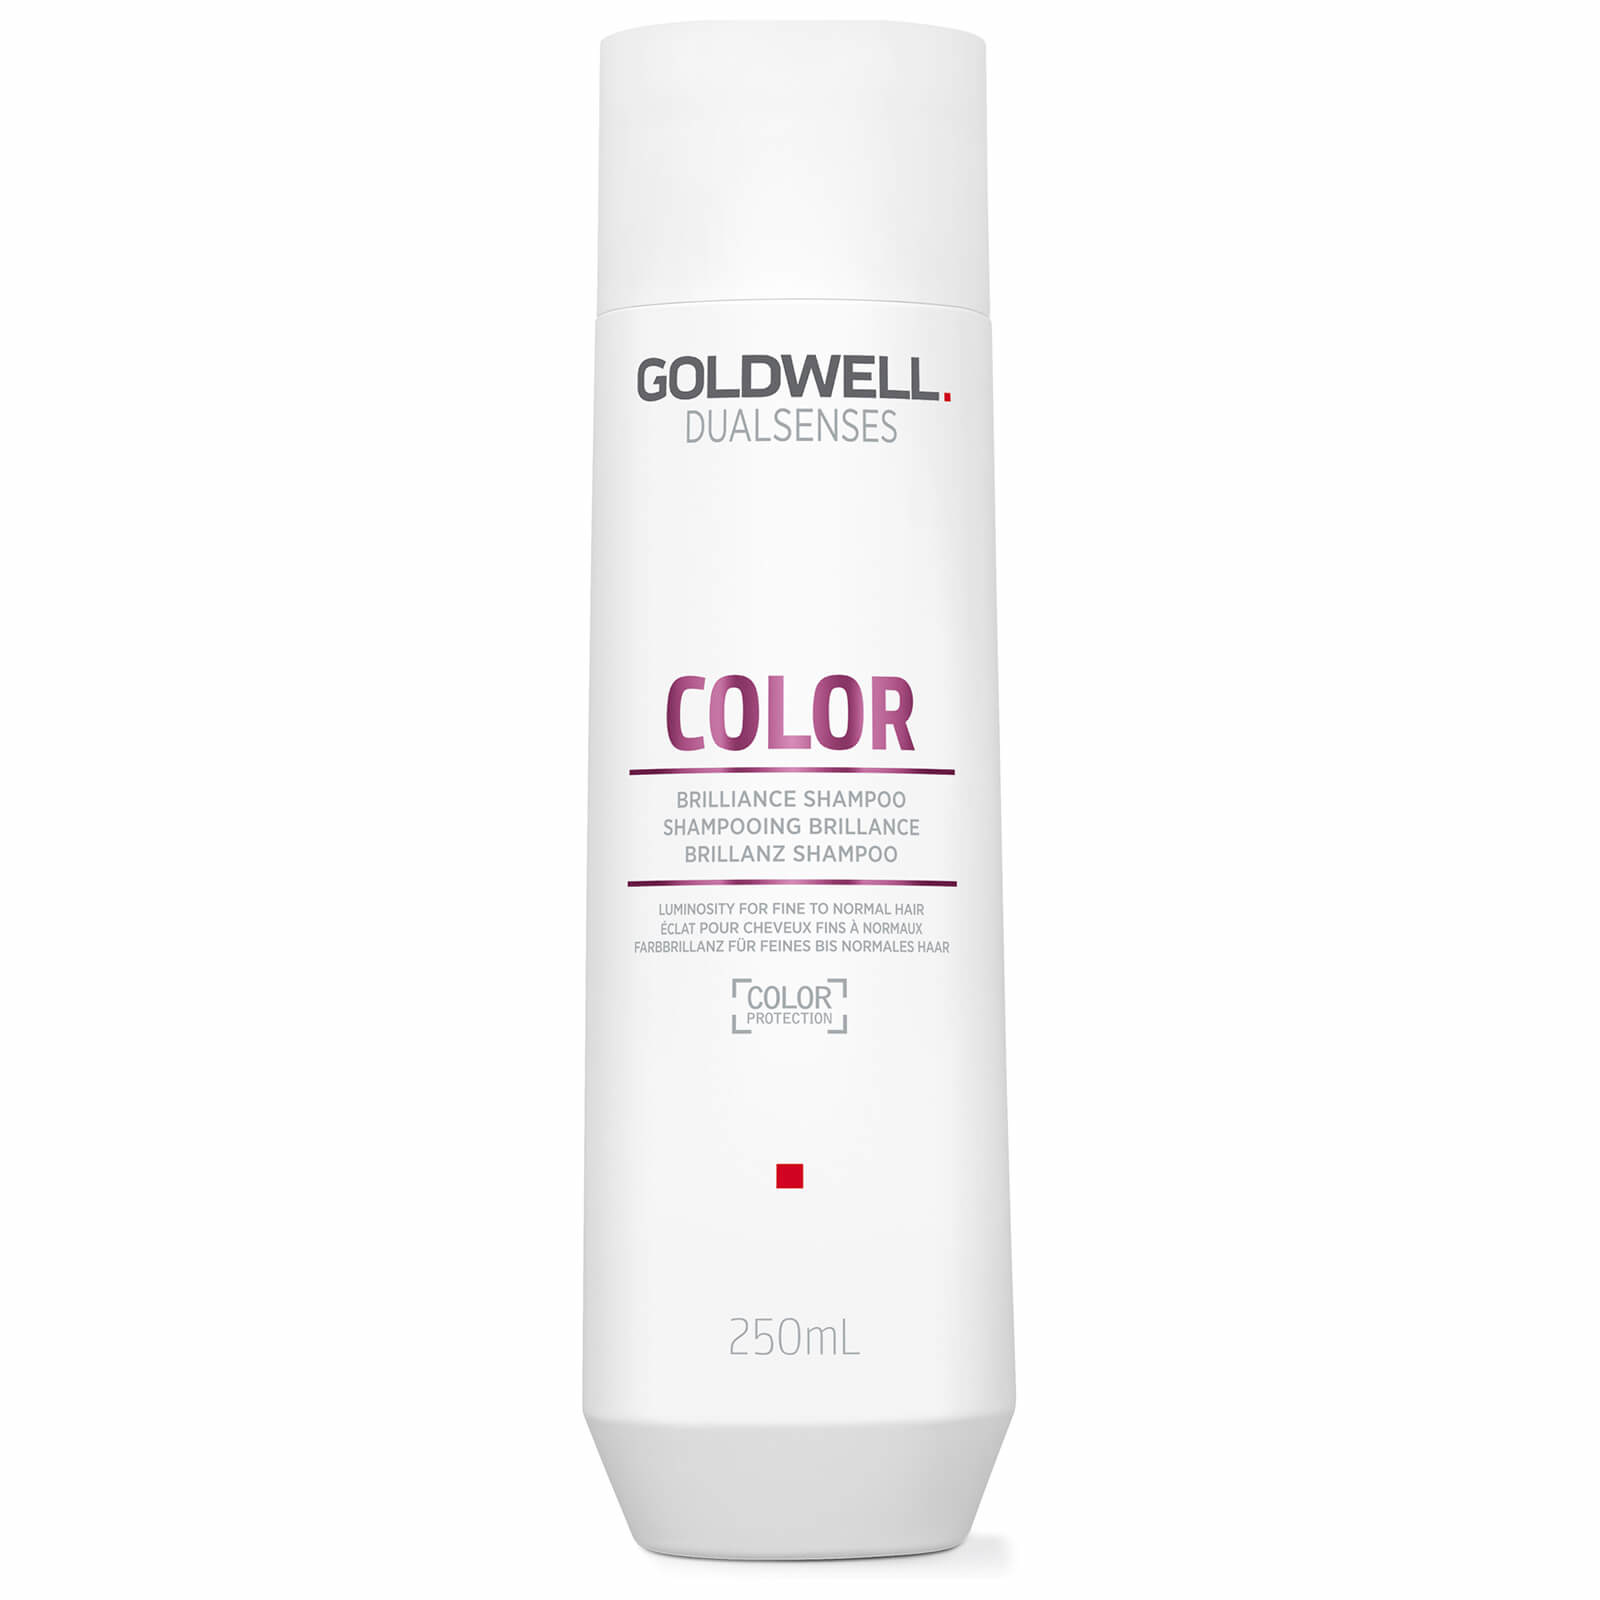 GOLDWELL - DUALSENSES | COLOR Shampooing Brillance